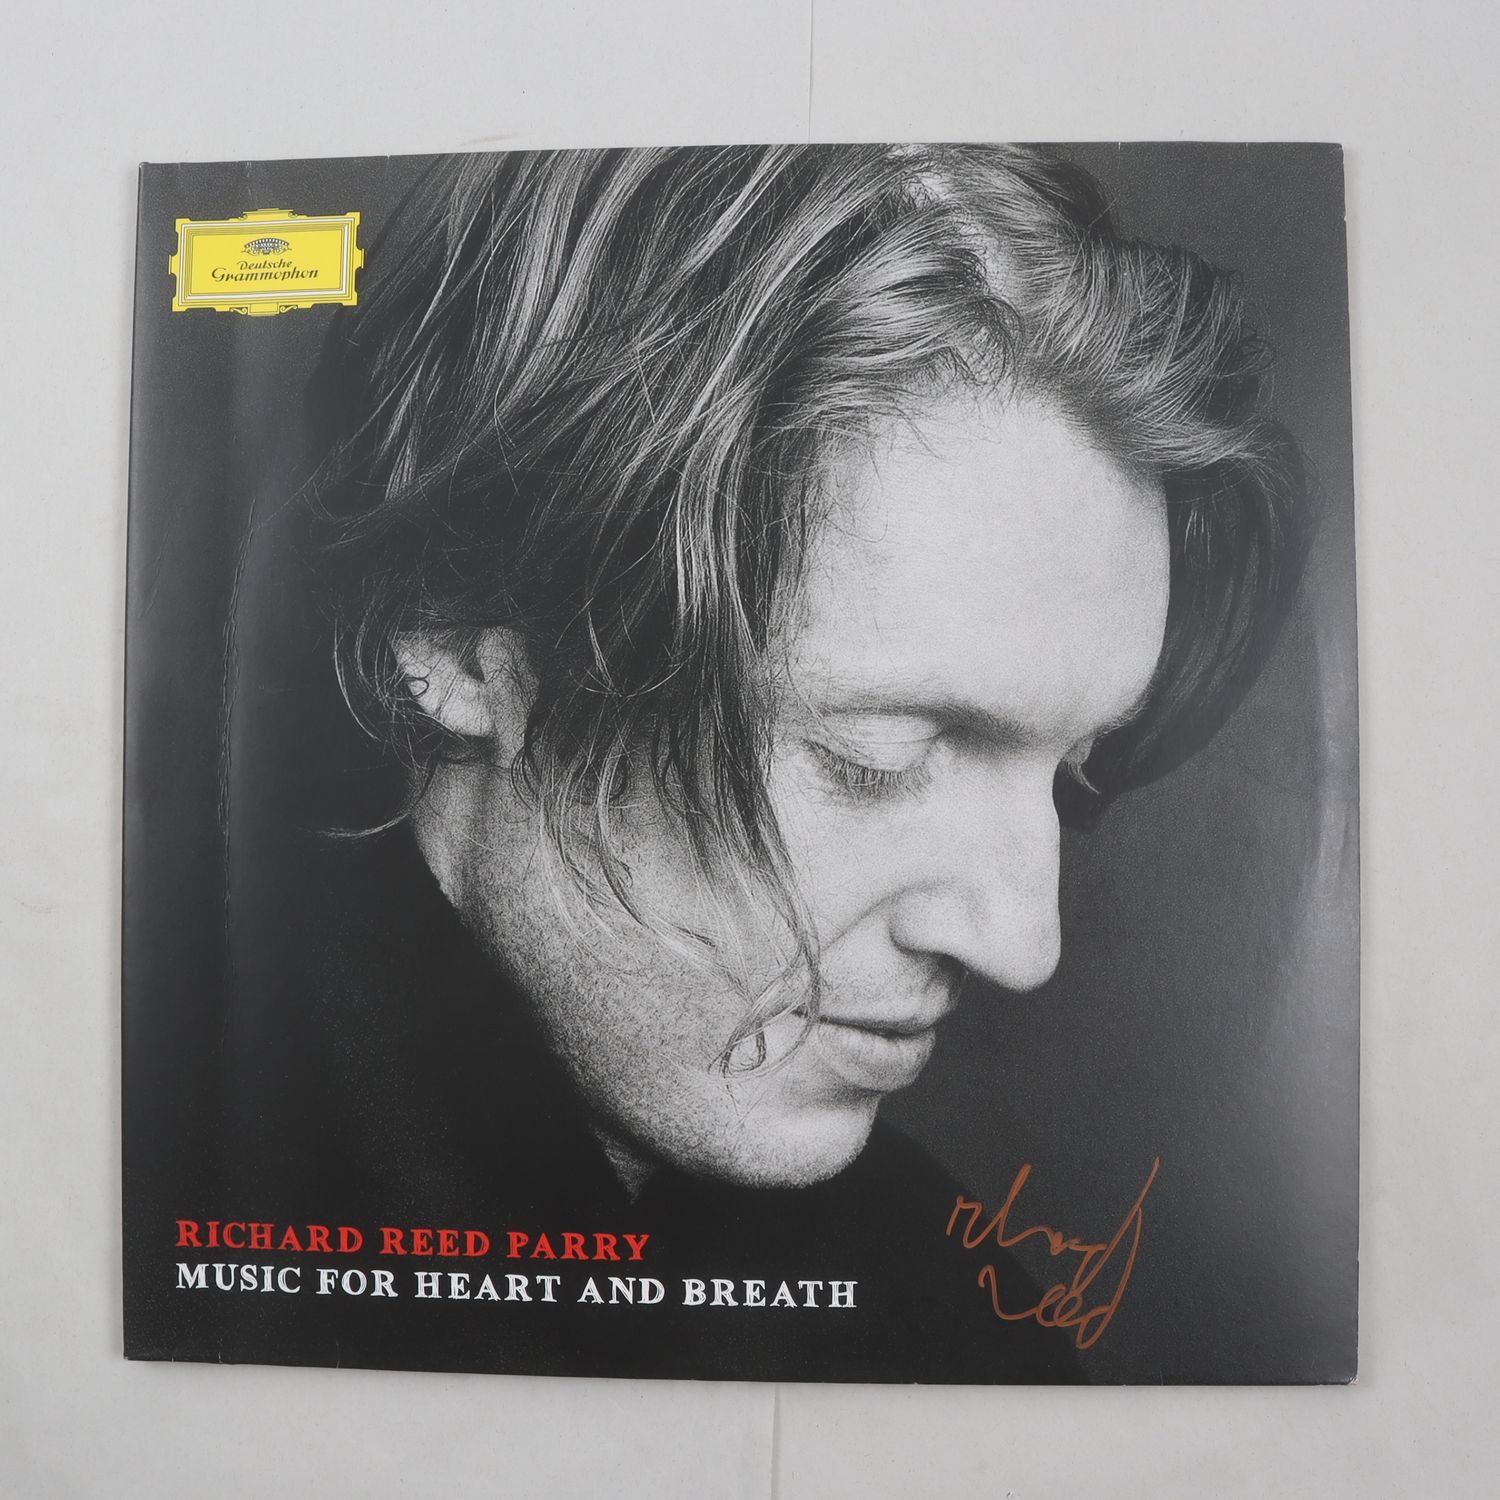 LP Richard Reed Parry , Music For Heart And Breath?, Signerad